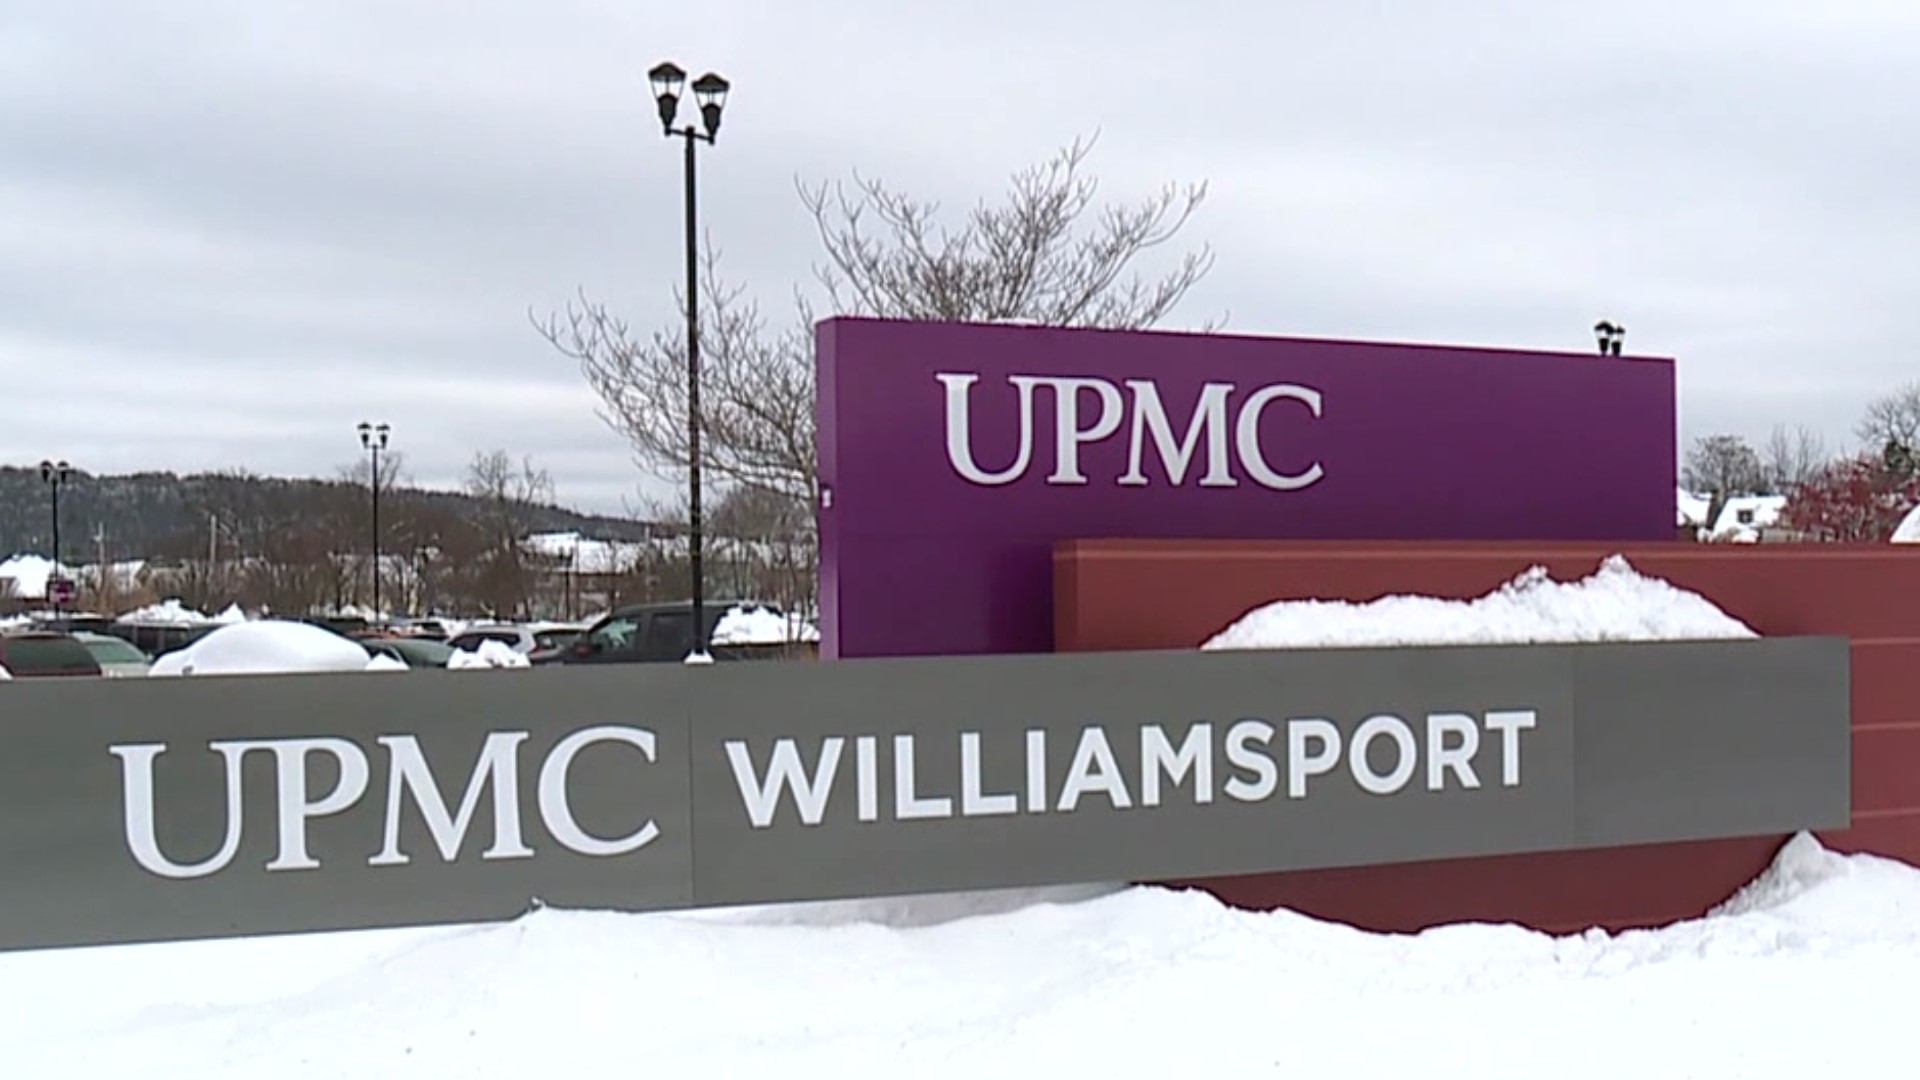 At UPMC Susquehanna, COVID-19 cases and hospitalizations are trending downwards.